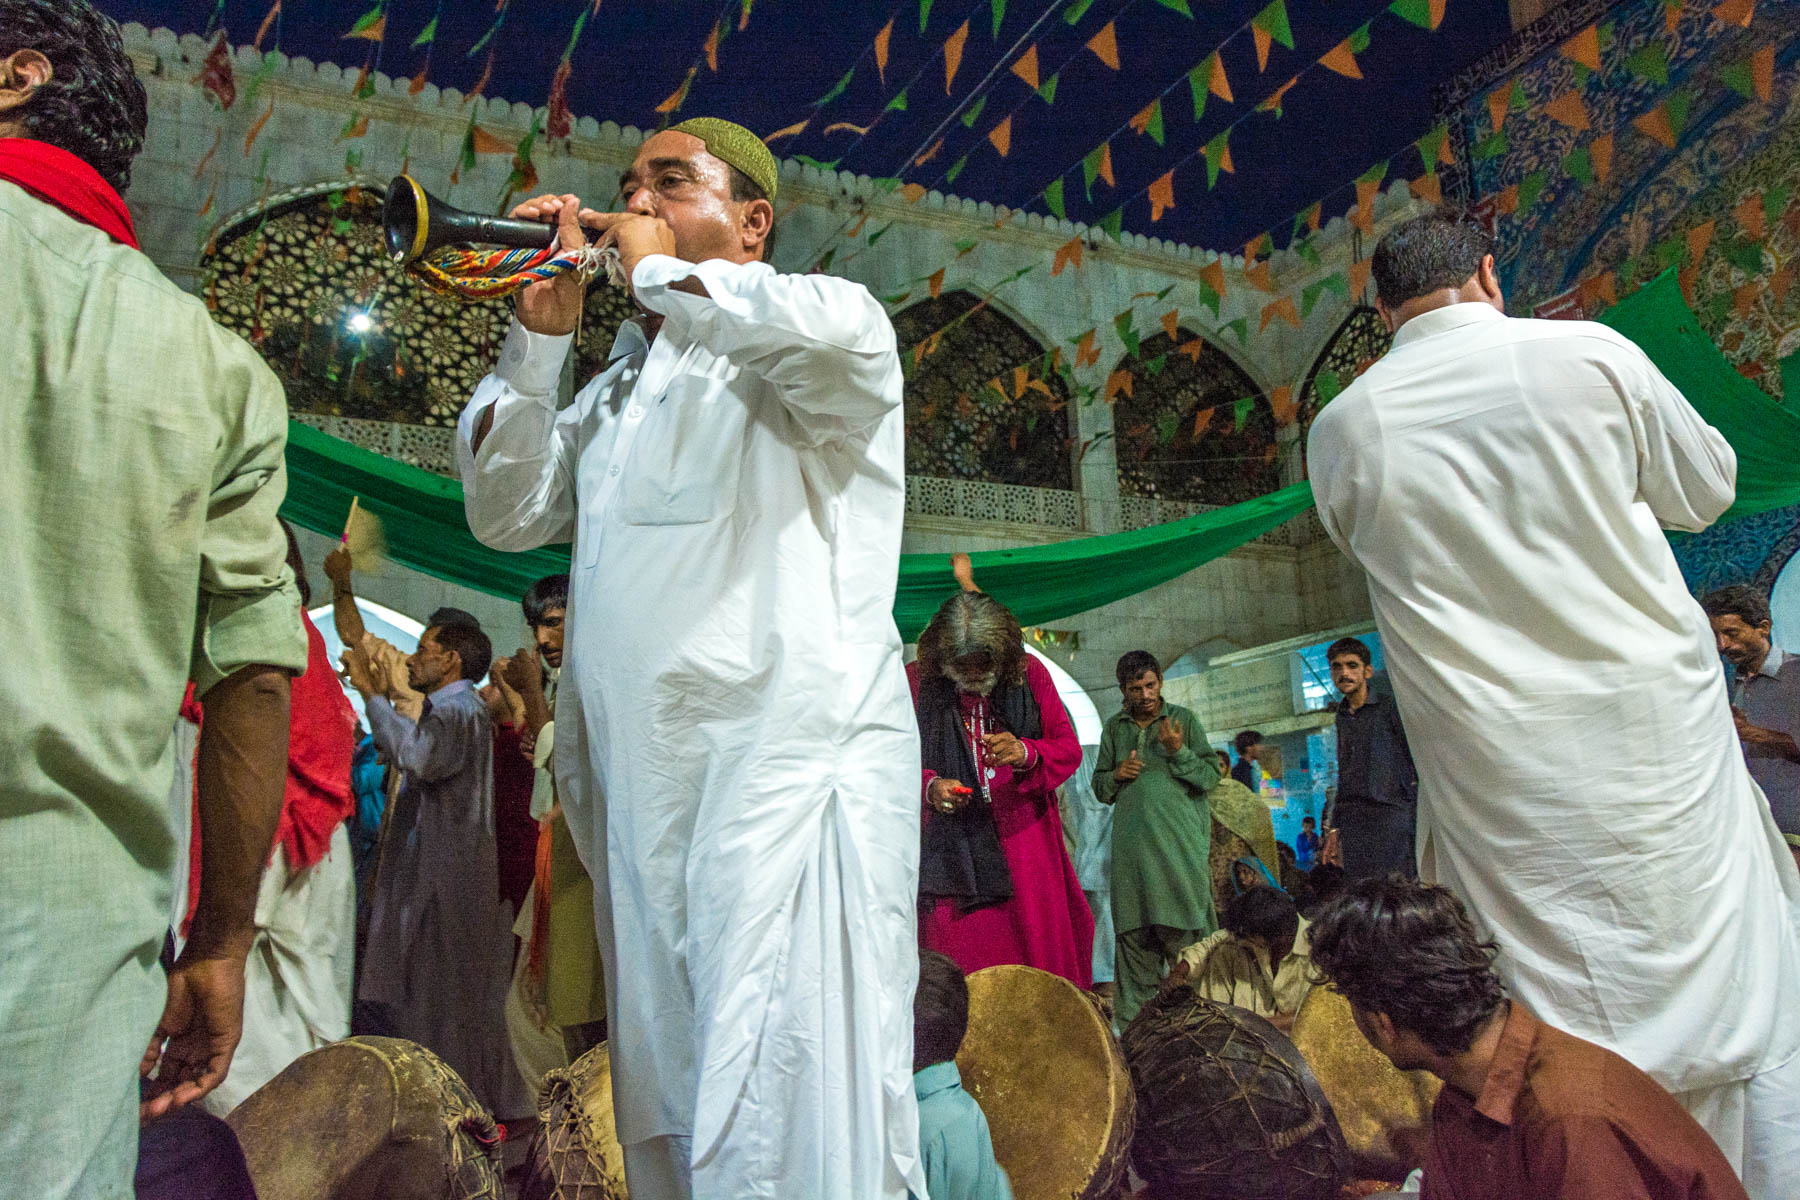 A horn player during sufi dancing at the Lal Shahbaz Qalandar shrine in Sehwan, Pakistan